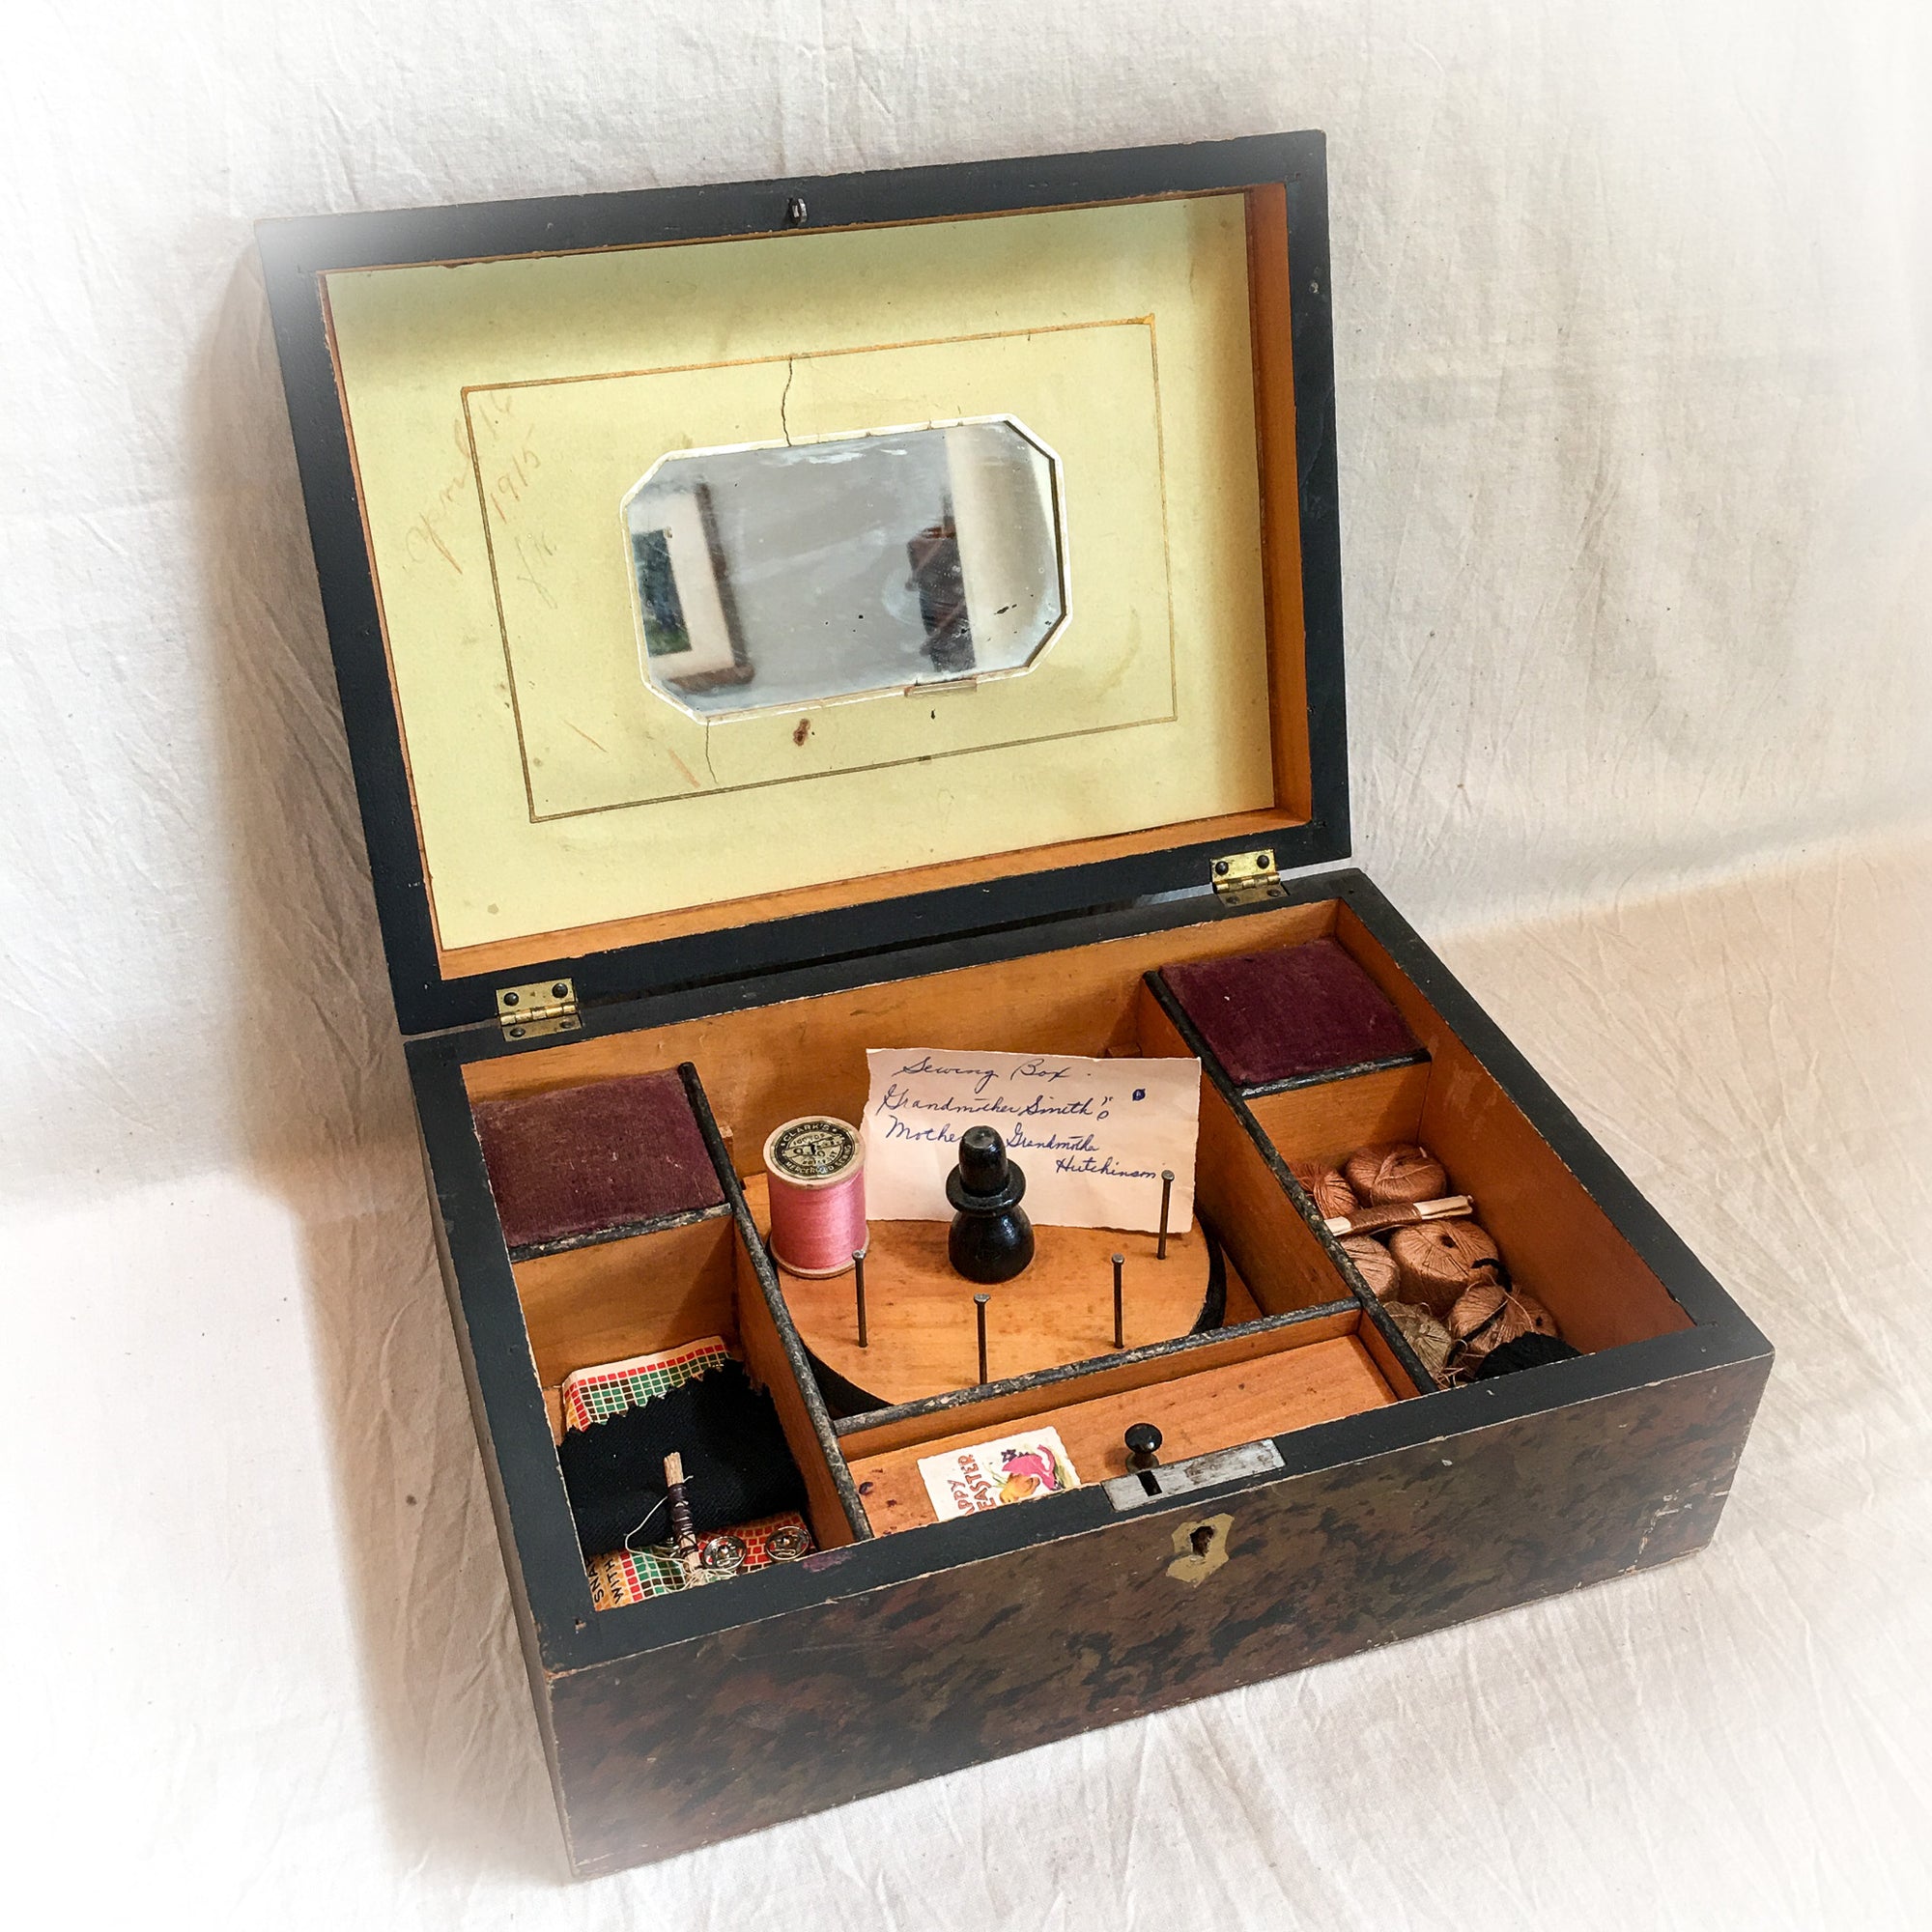 1915 Sewing Box with Contents, Original Pin Cushions, Removable Spool Caddy